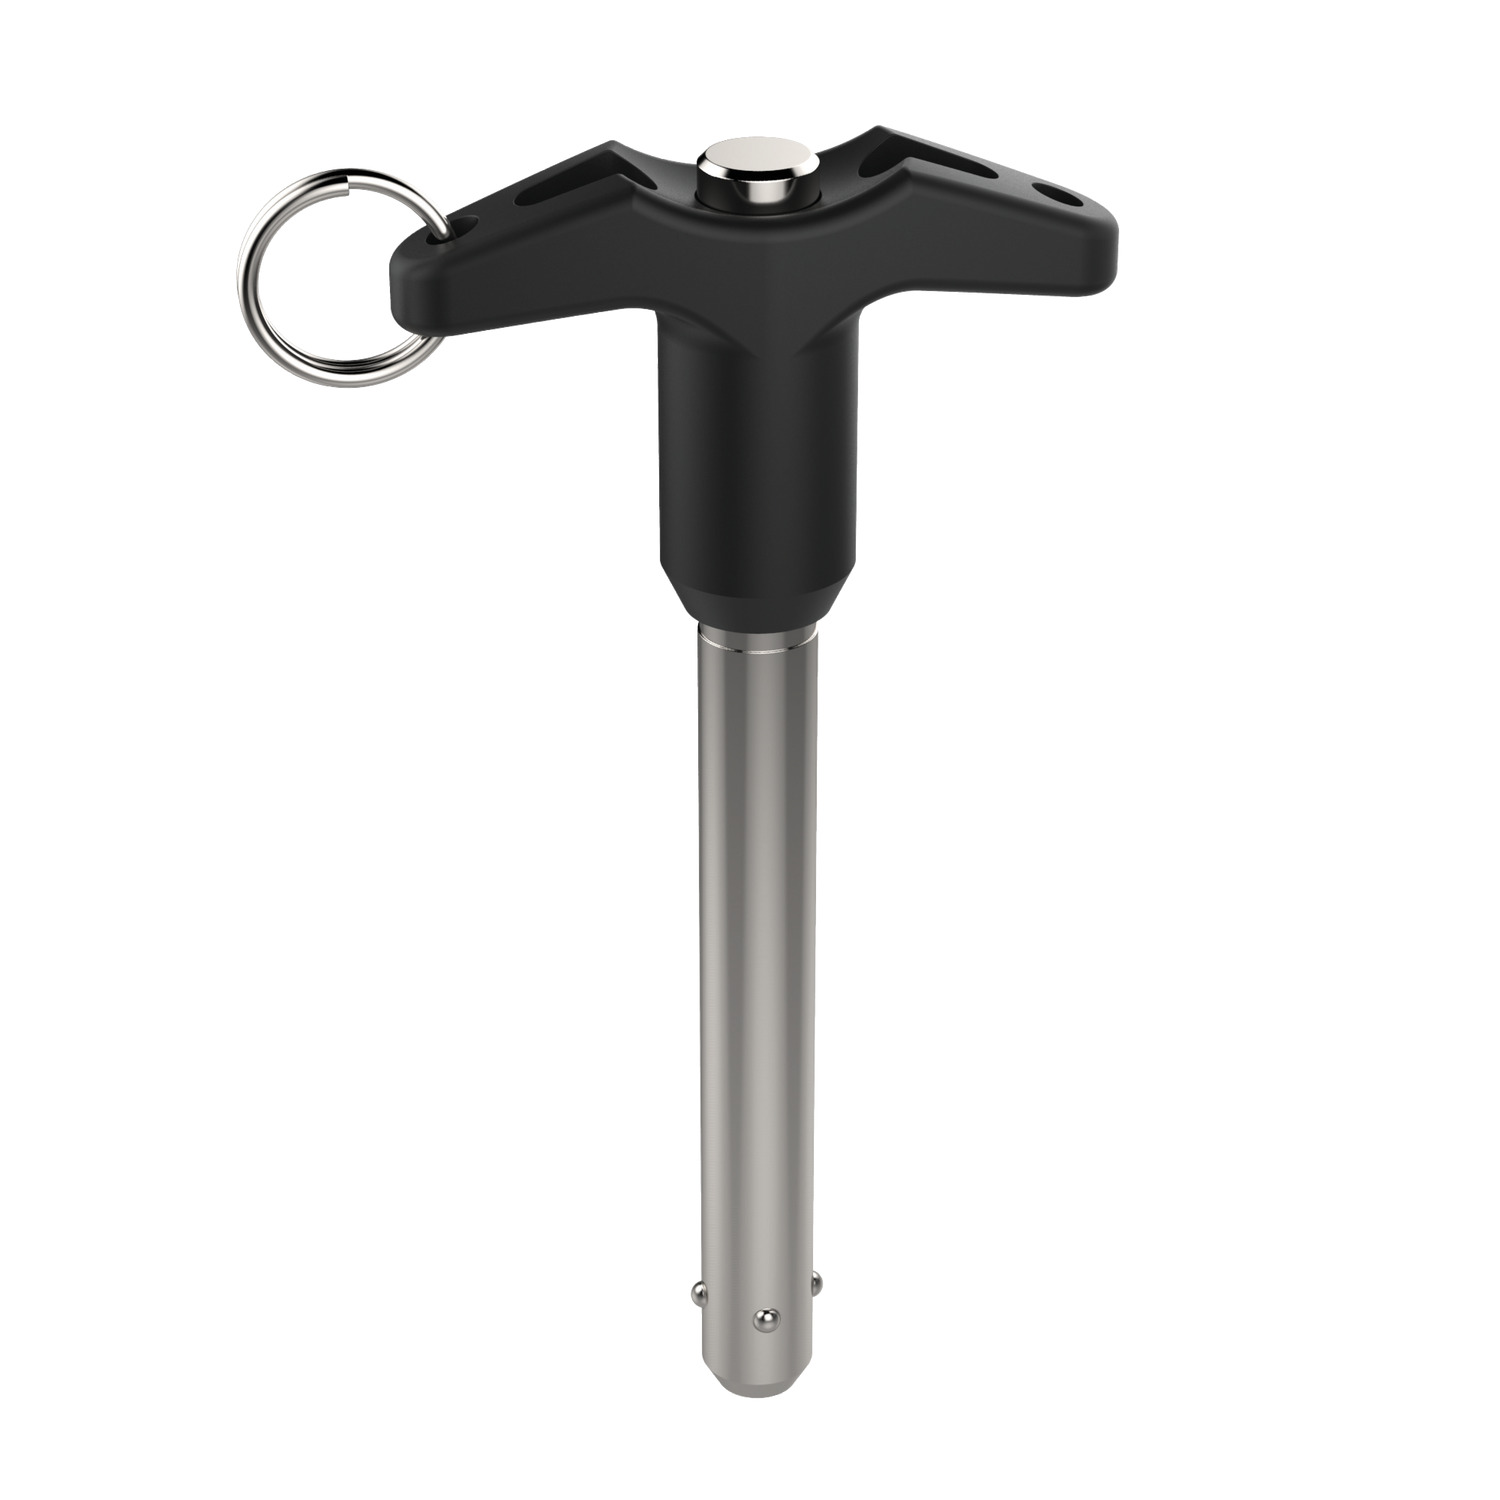 Aviation Pip-Pin - Standard T-Handle Produced to NASM 17985 TA-handled design for excellent handling. For wide range of aviation applications; interior panels, folding tables, ground handling equipment.